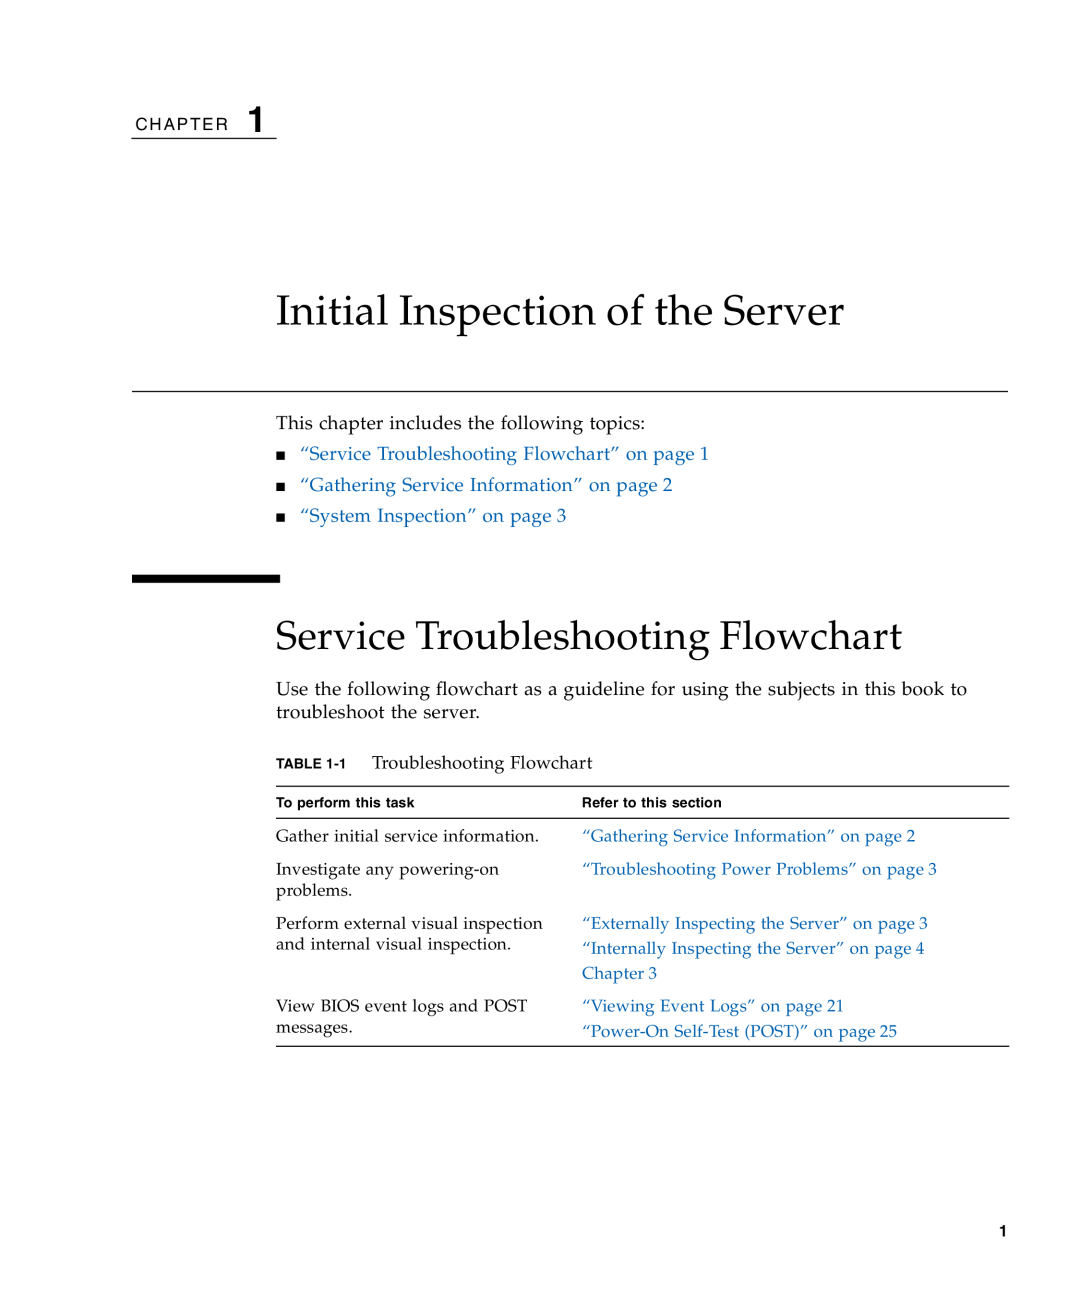 Sun Microsystems X4140, X4240, X4440 Initial Inspection of the Server, Service Troubleshooting Flowchart, C H A P T E R 